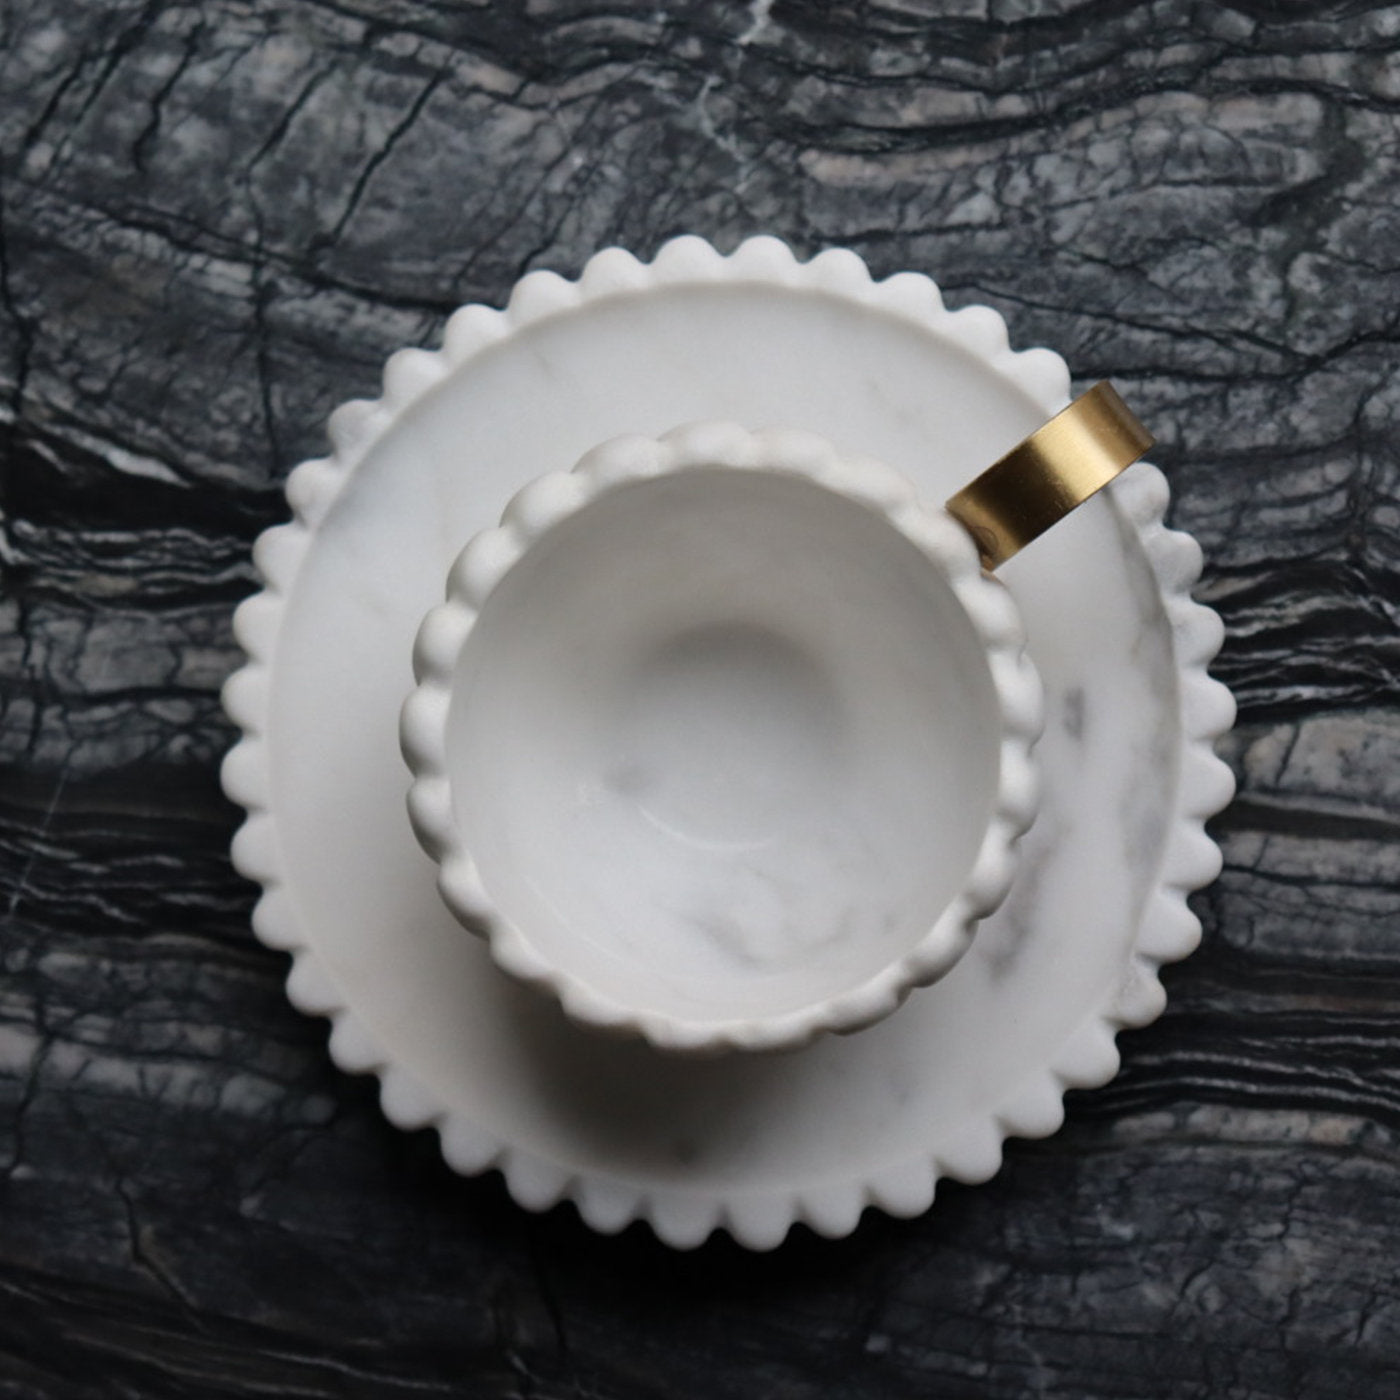 Victoria Teacup and Saucer Set by Bethan Gray - Alternative view 3